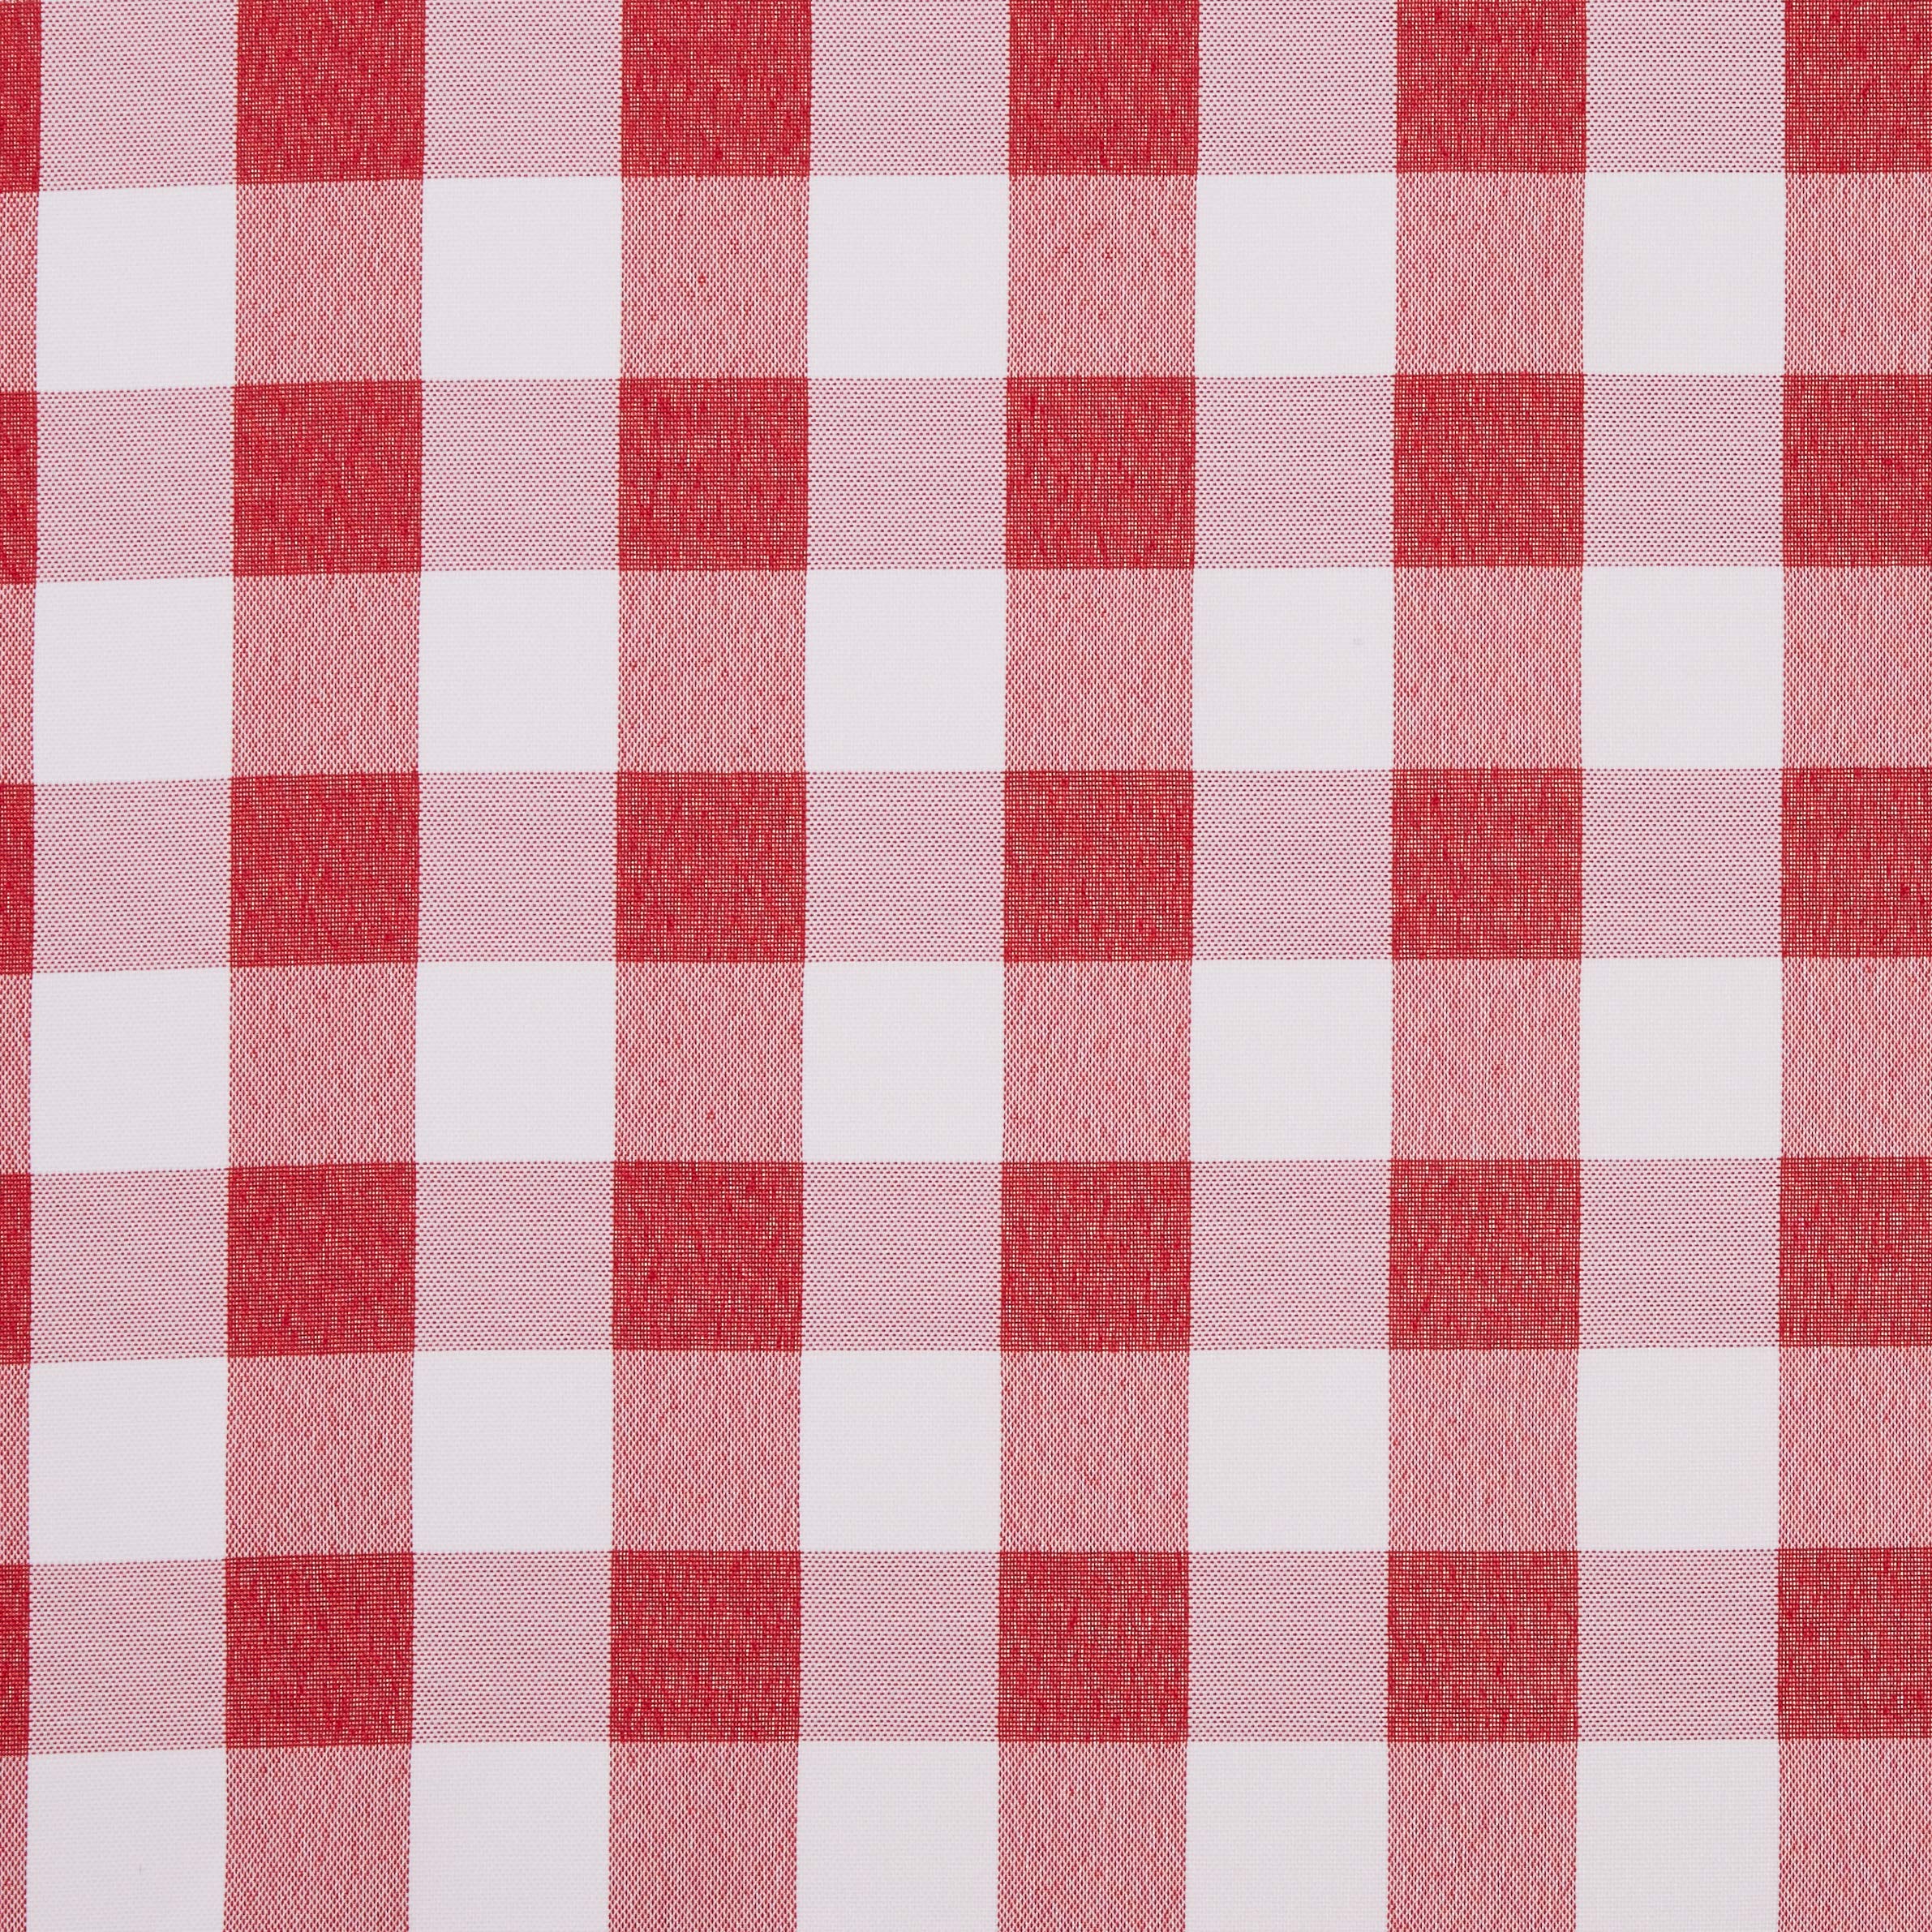 LA Linen Gingham Tablecloth - Checkered Tablecloth for Parties, Picnics & More - Farmhouse Tablecloth - Spring Tablecloth - Picnic Tablecloth - Cloth Tablecloths for Round Tables - 51